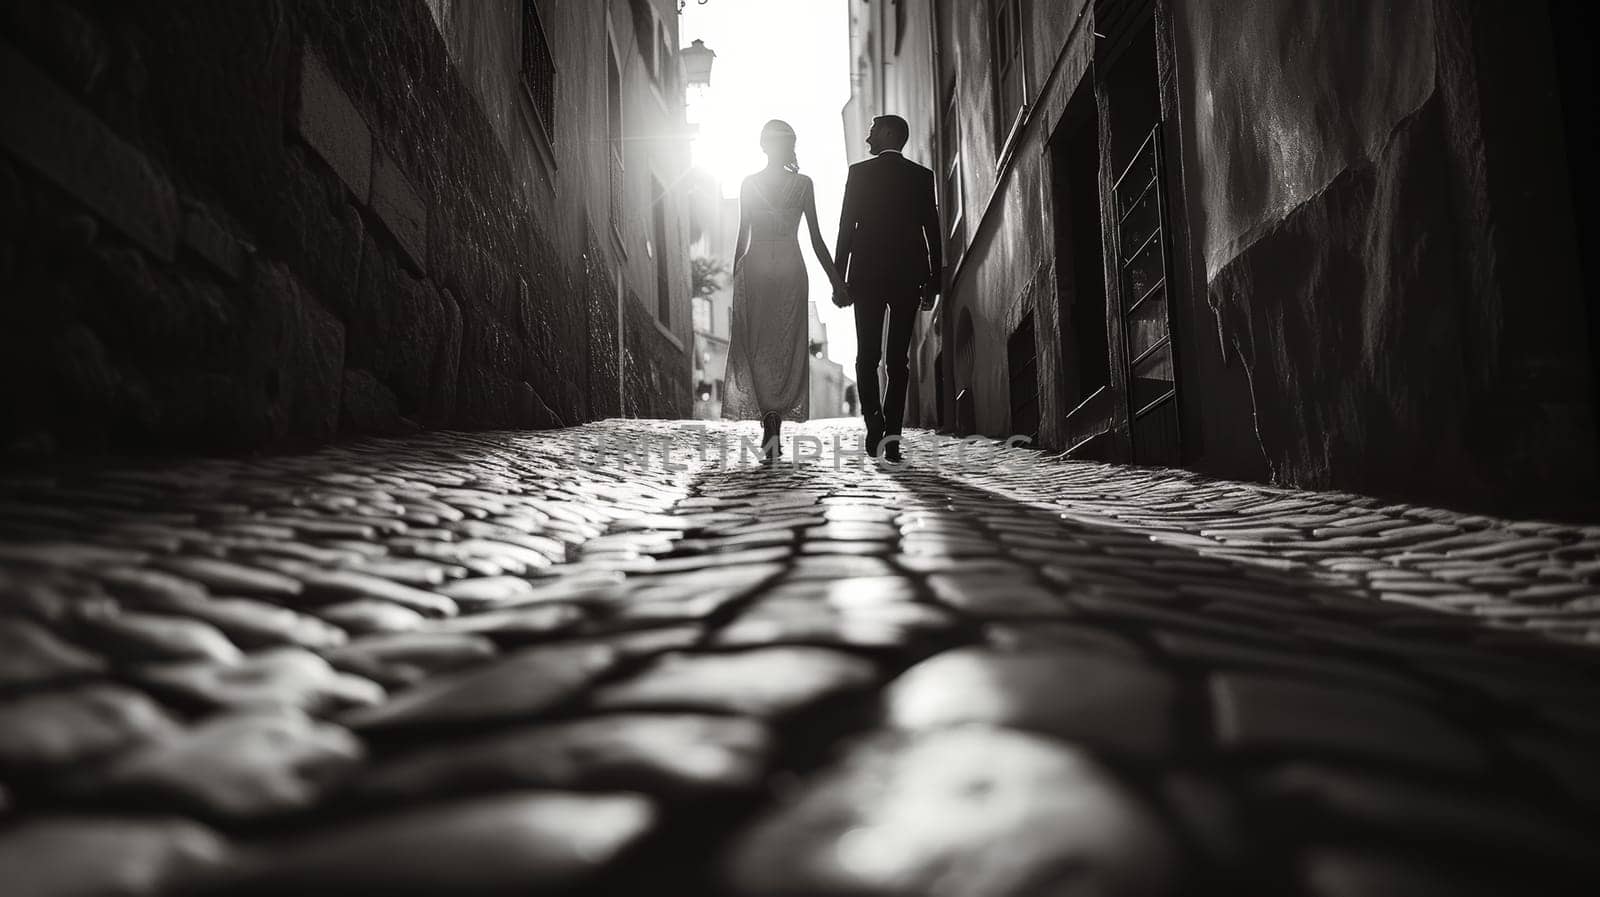 Silhouette of a couple walking hand in hand down a cobblestone alley at dusk, emanating romantic atmosphere